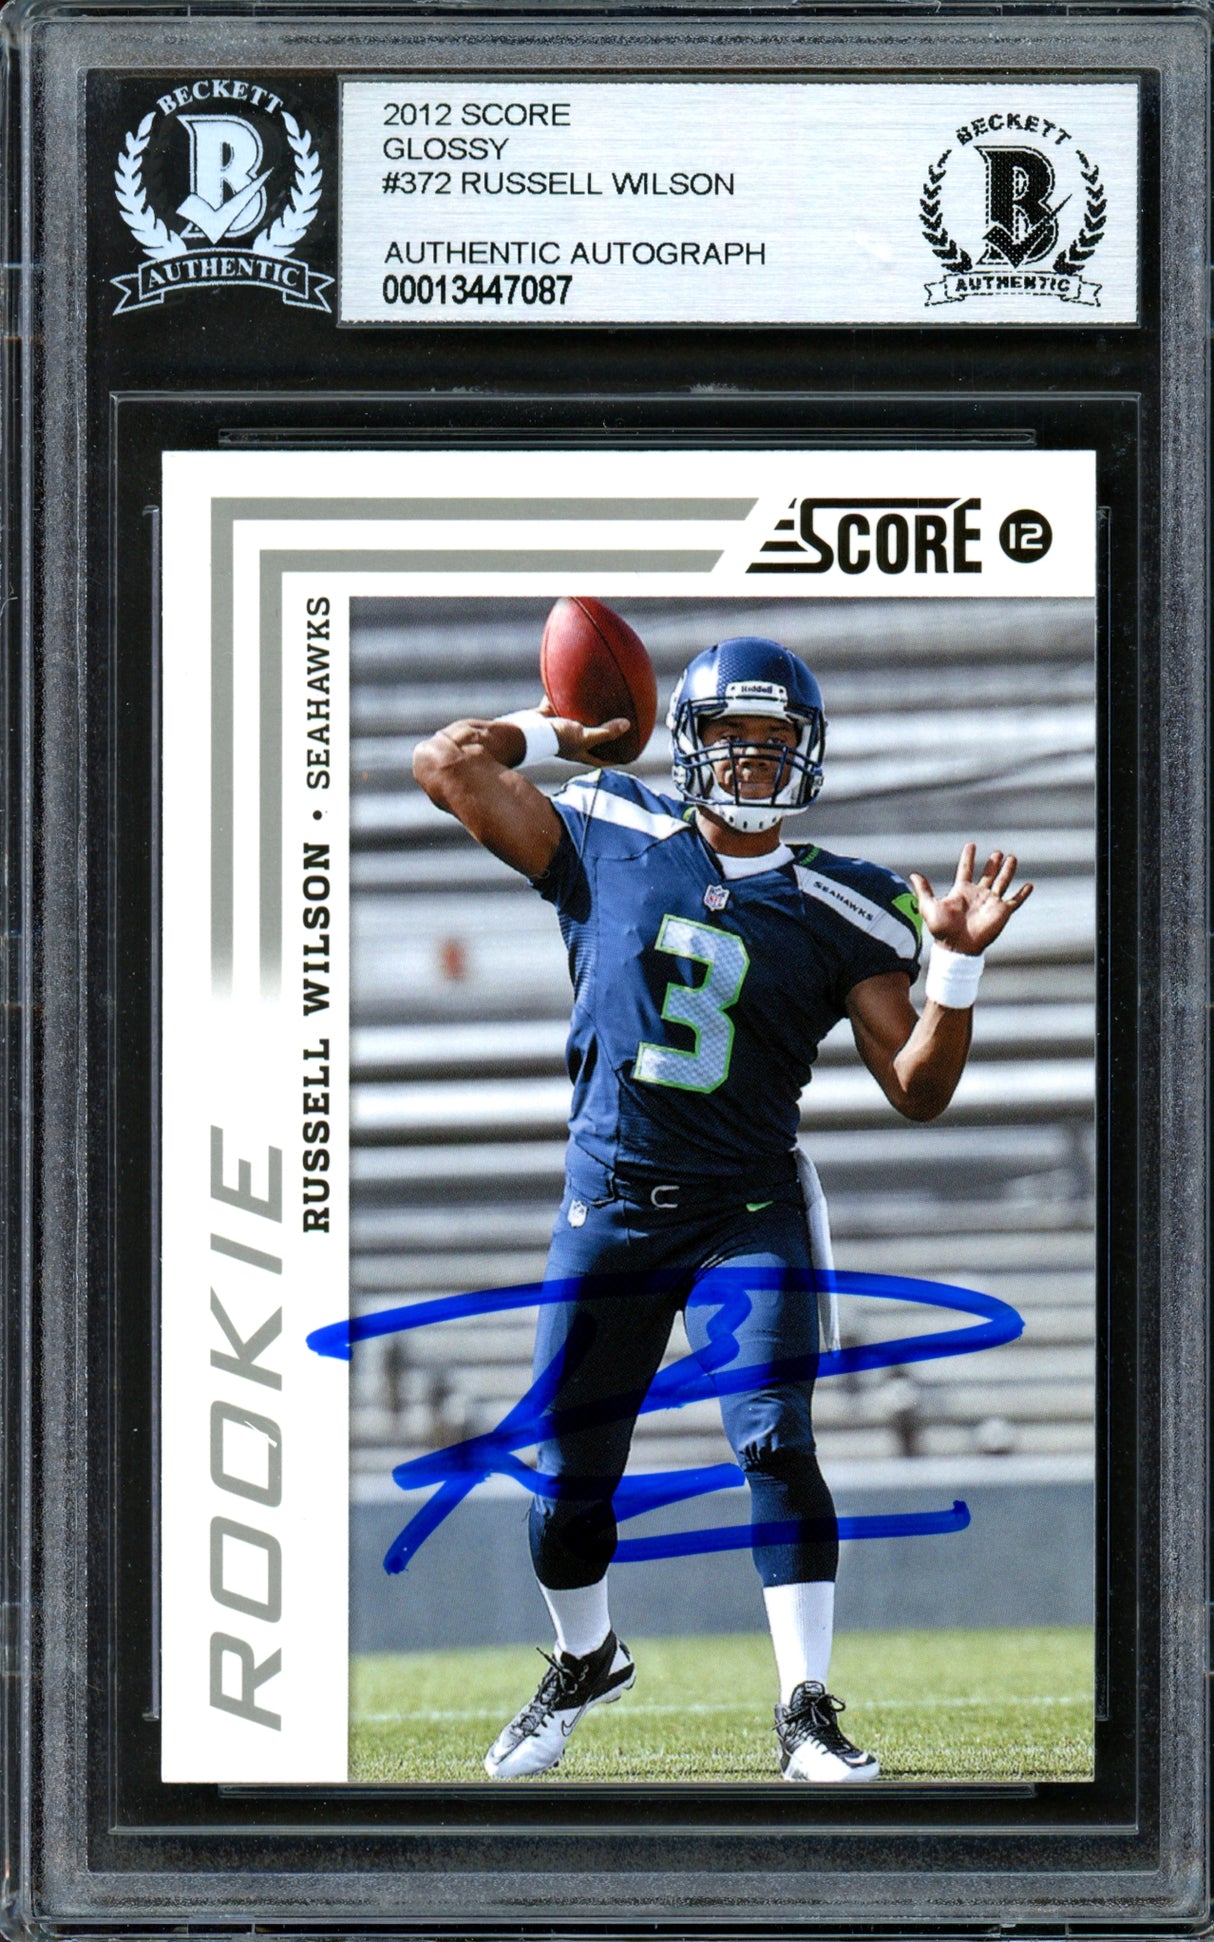 Russell Wilson Autographed 2012 Score Glossy Rookie Card #372 Seattle Seahawks Beckett BAS #13447087